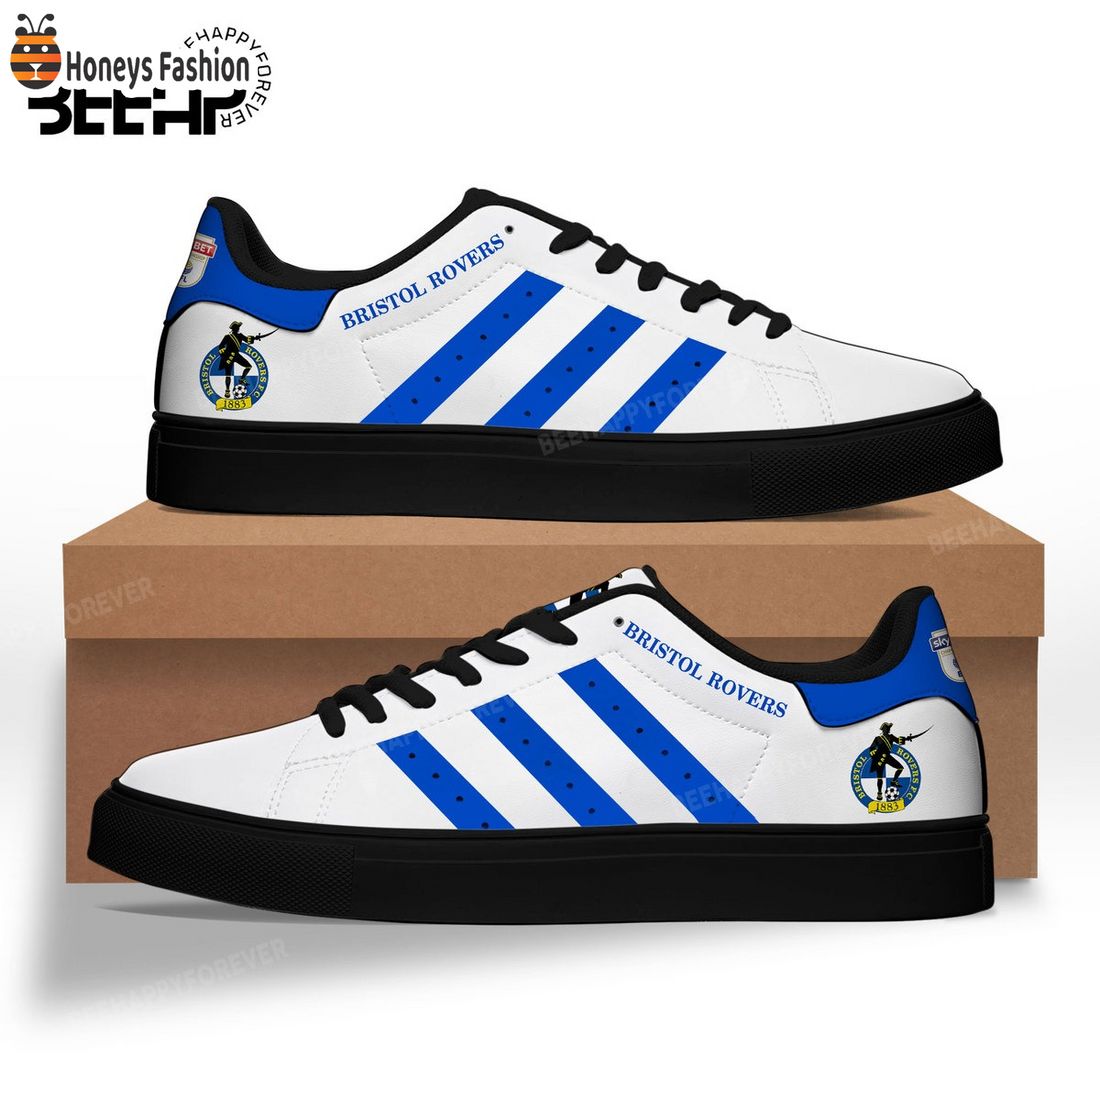 Bristol Rovers Stan Smith Adidas Shoes